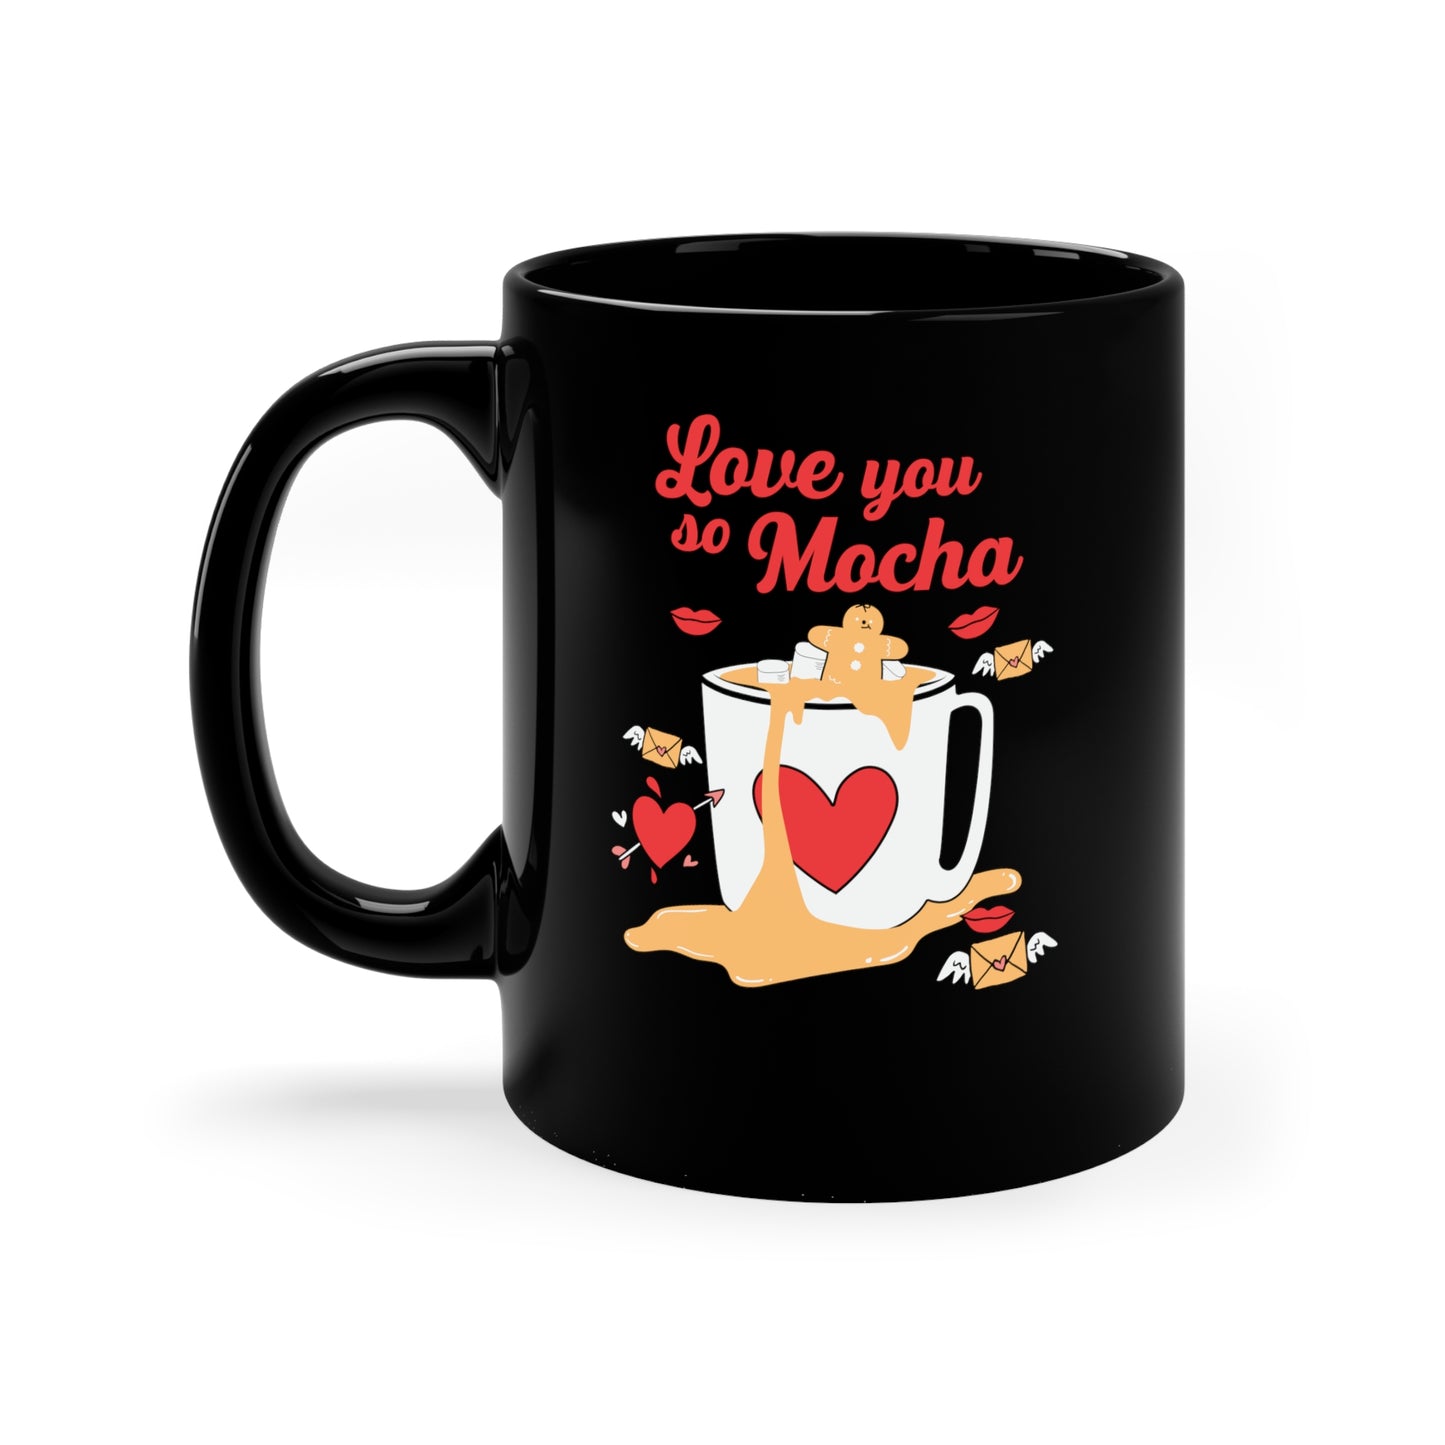 Funny Valentine's Day Coffee Mug, Gift for Coffee Lovers and Couples, Cute Mug,